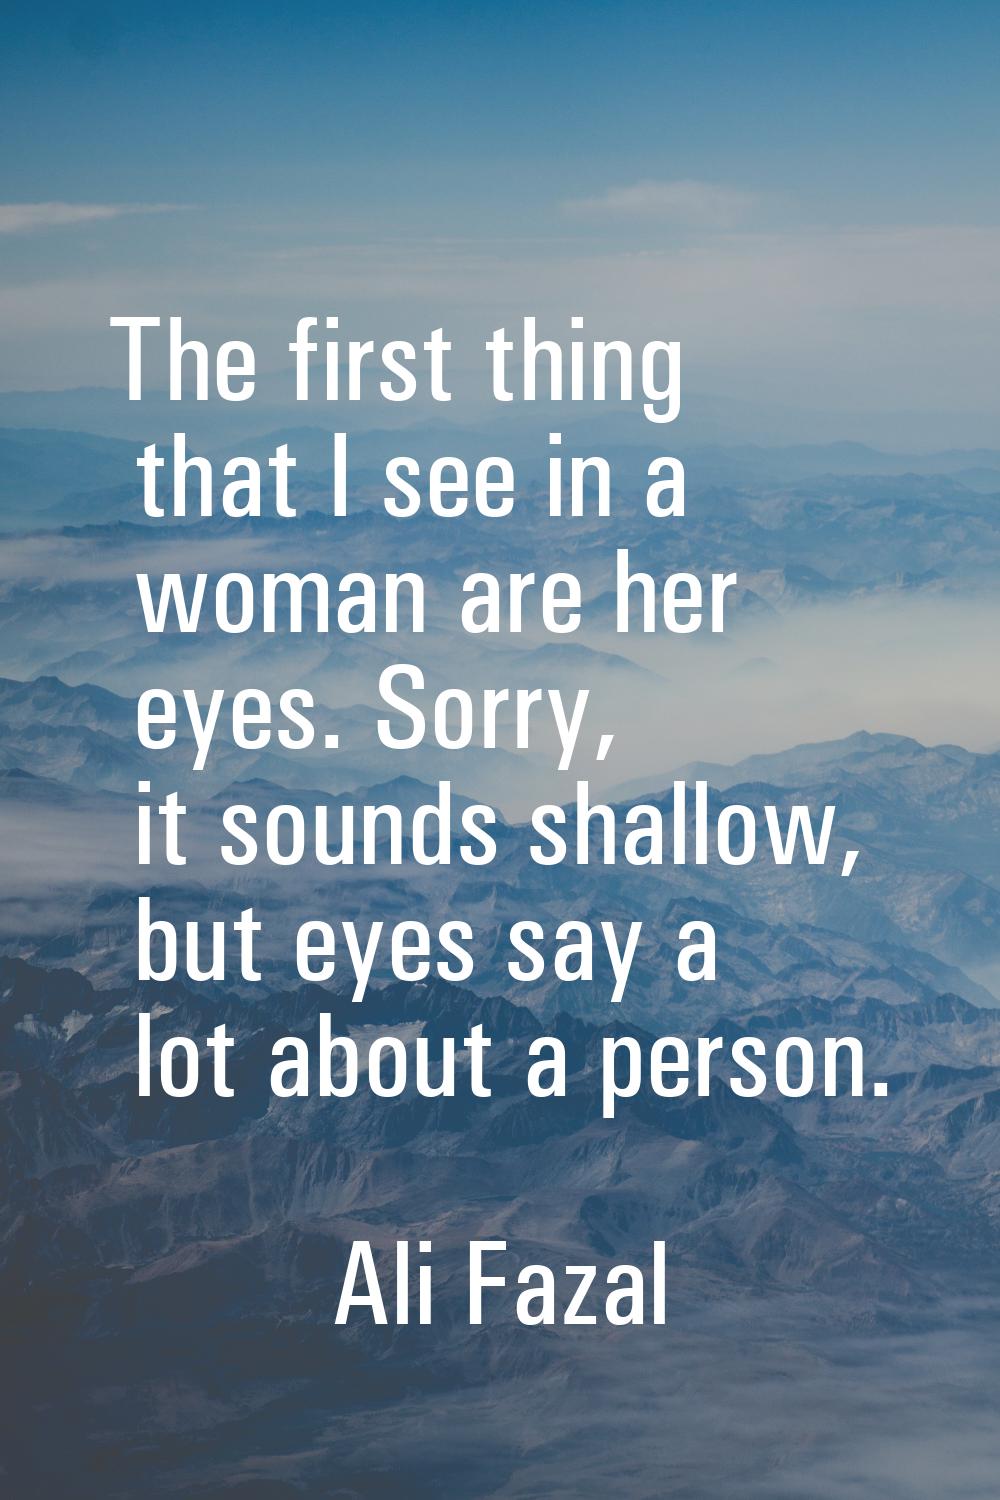 The first thing that I see in a woman are her eyes. Sorry, it sounds shallow, but eyes say a lot ab